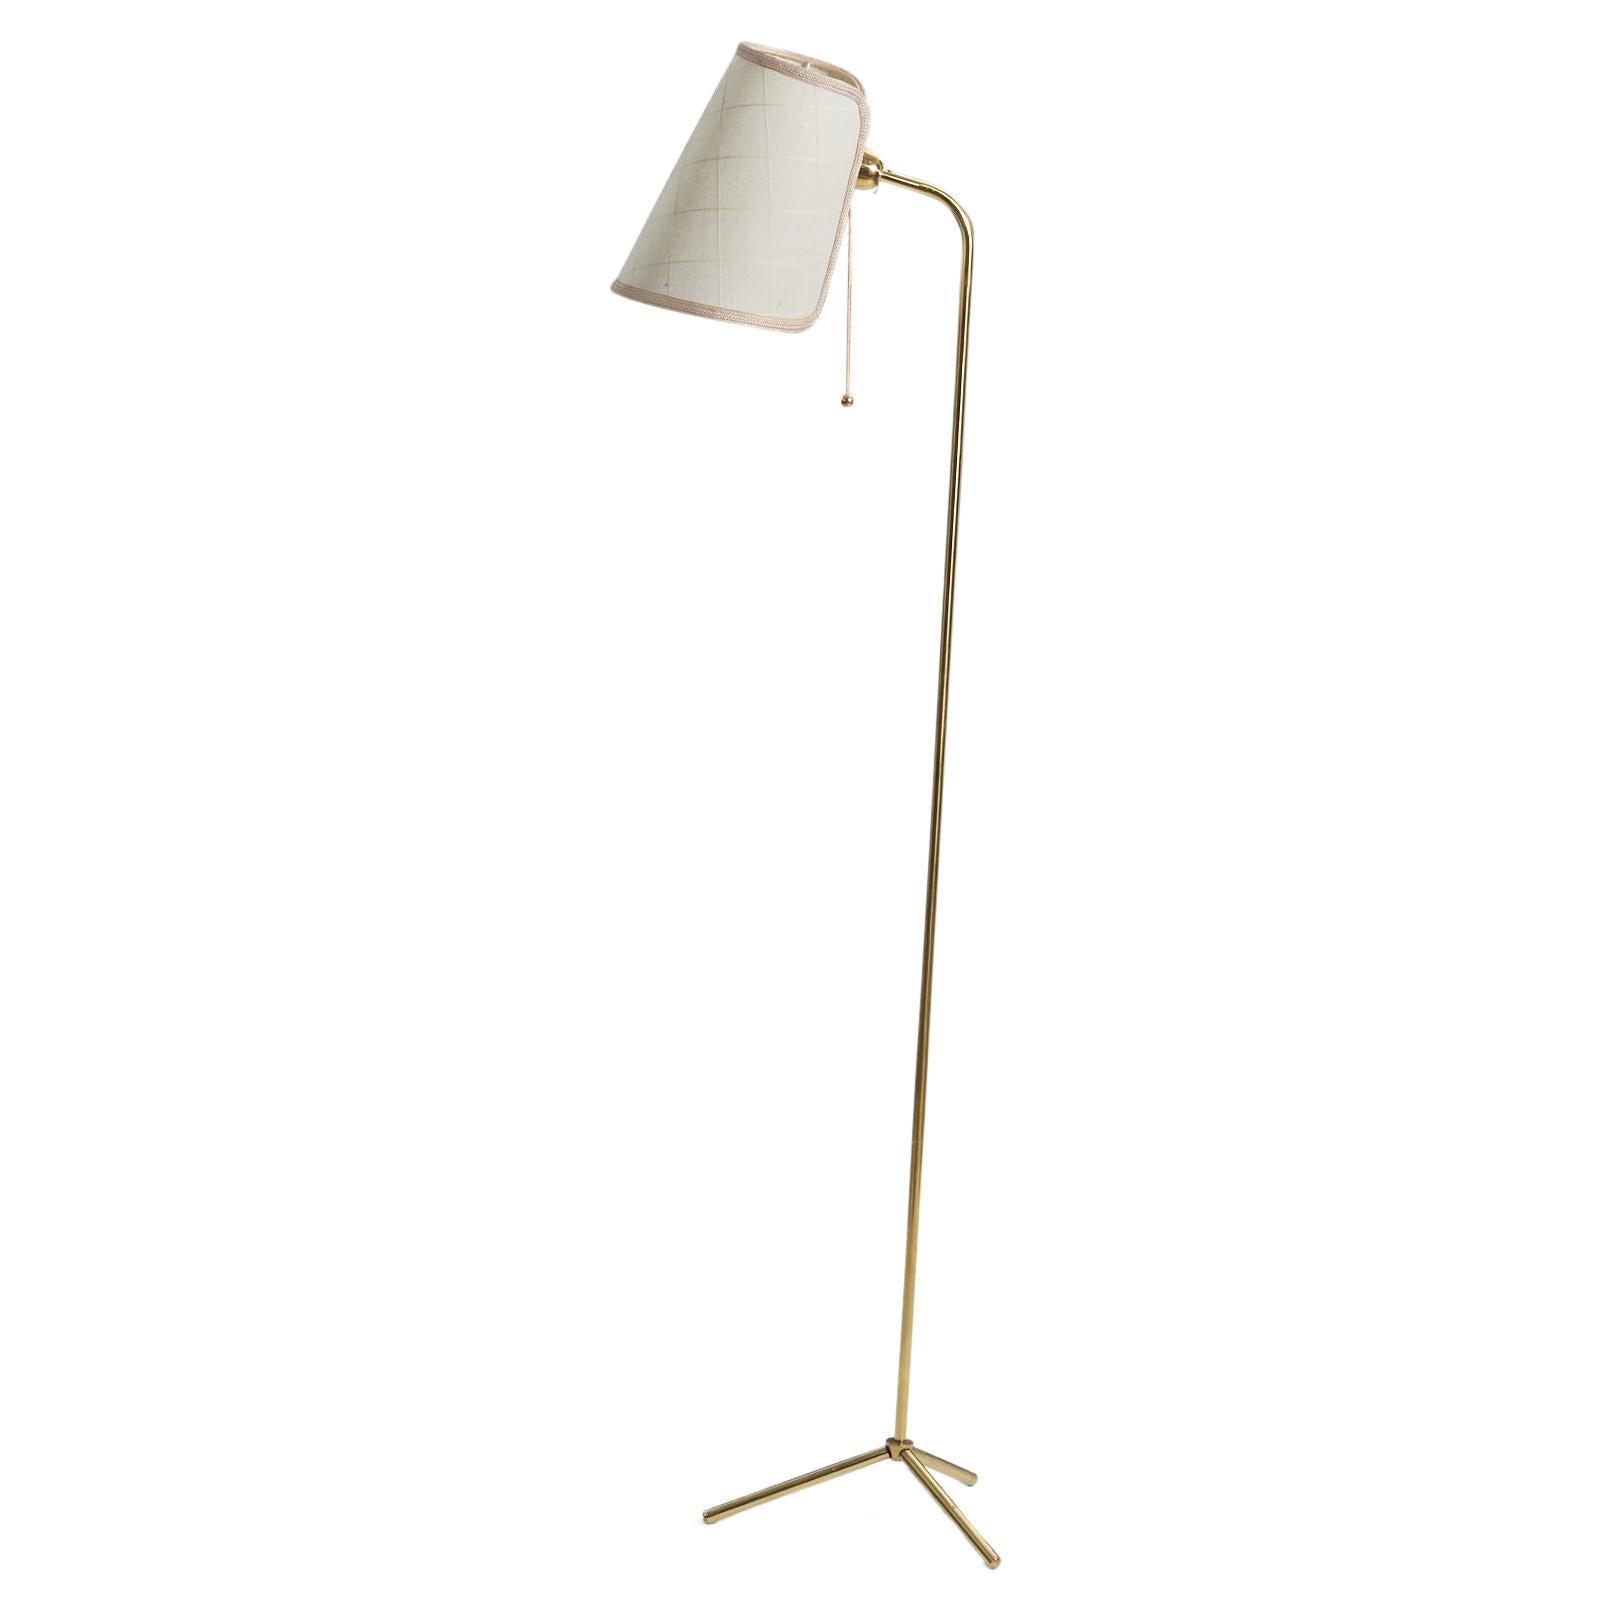 Stockmann-ornö, Floor Lamp, Brass and Fabric, Finland, 1950s For Sale